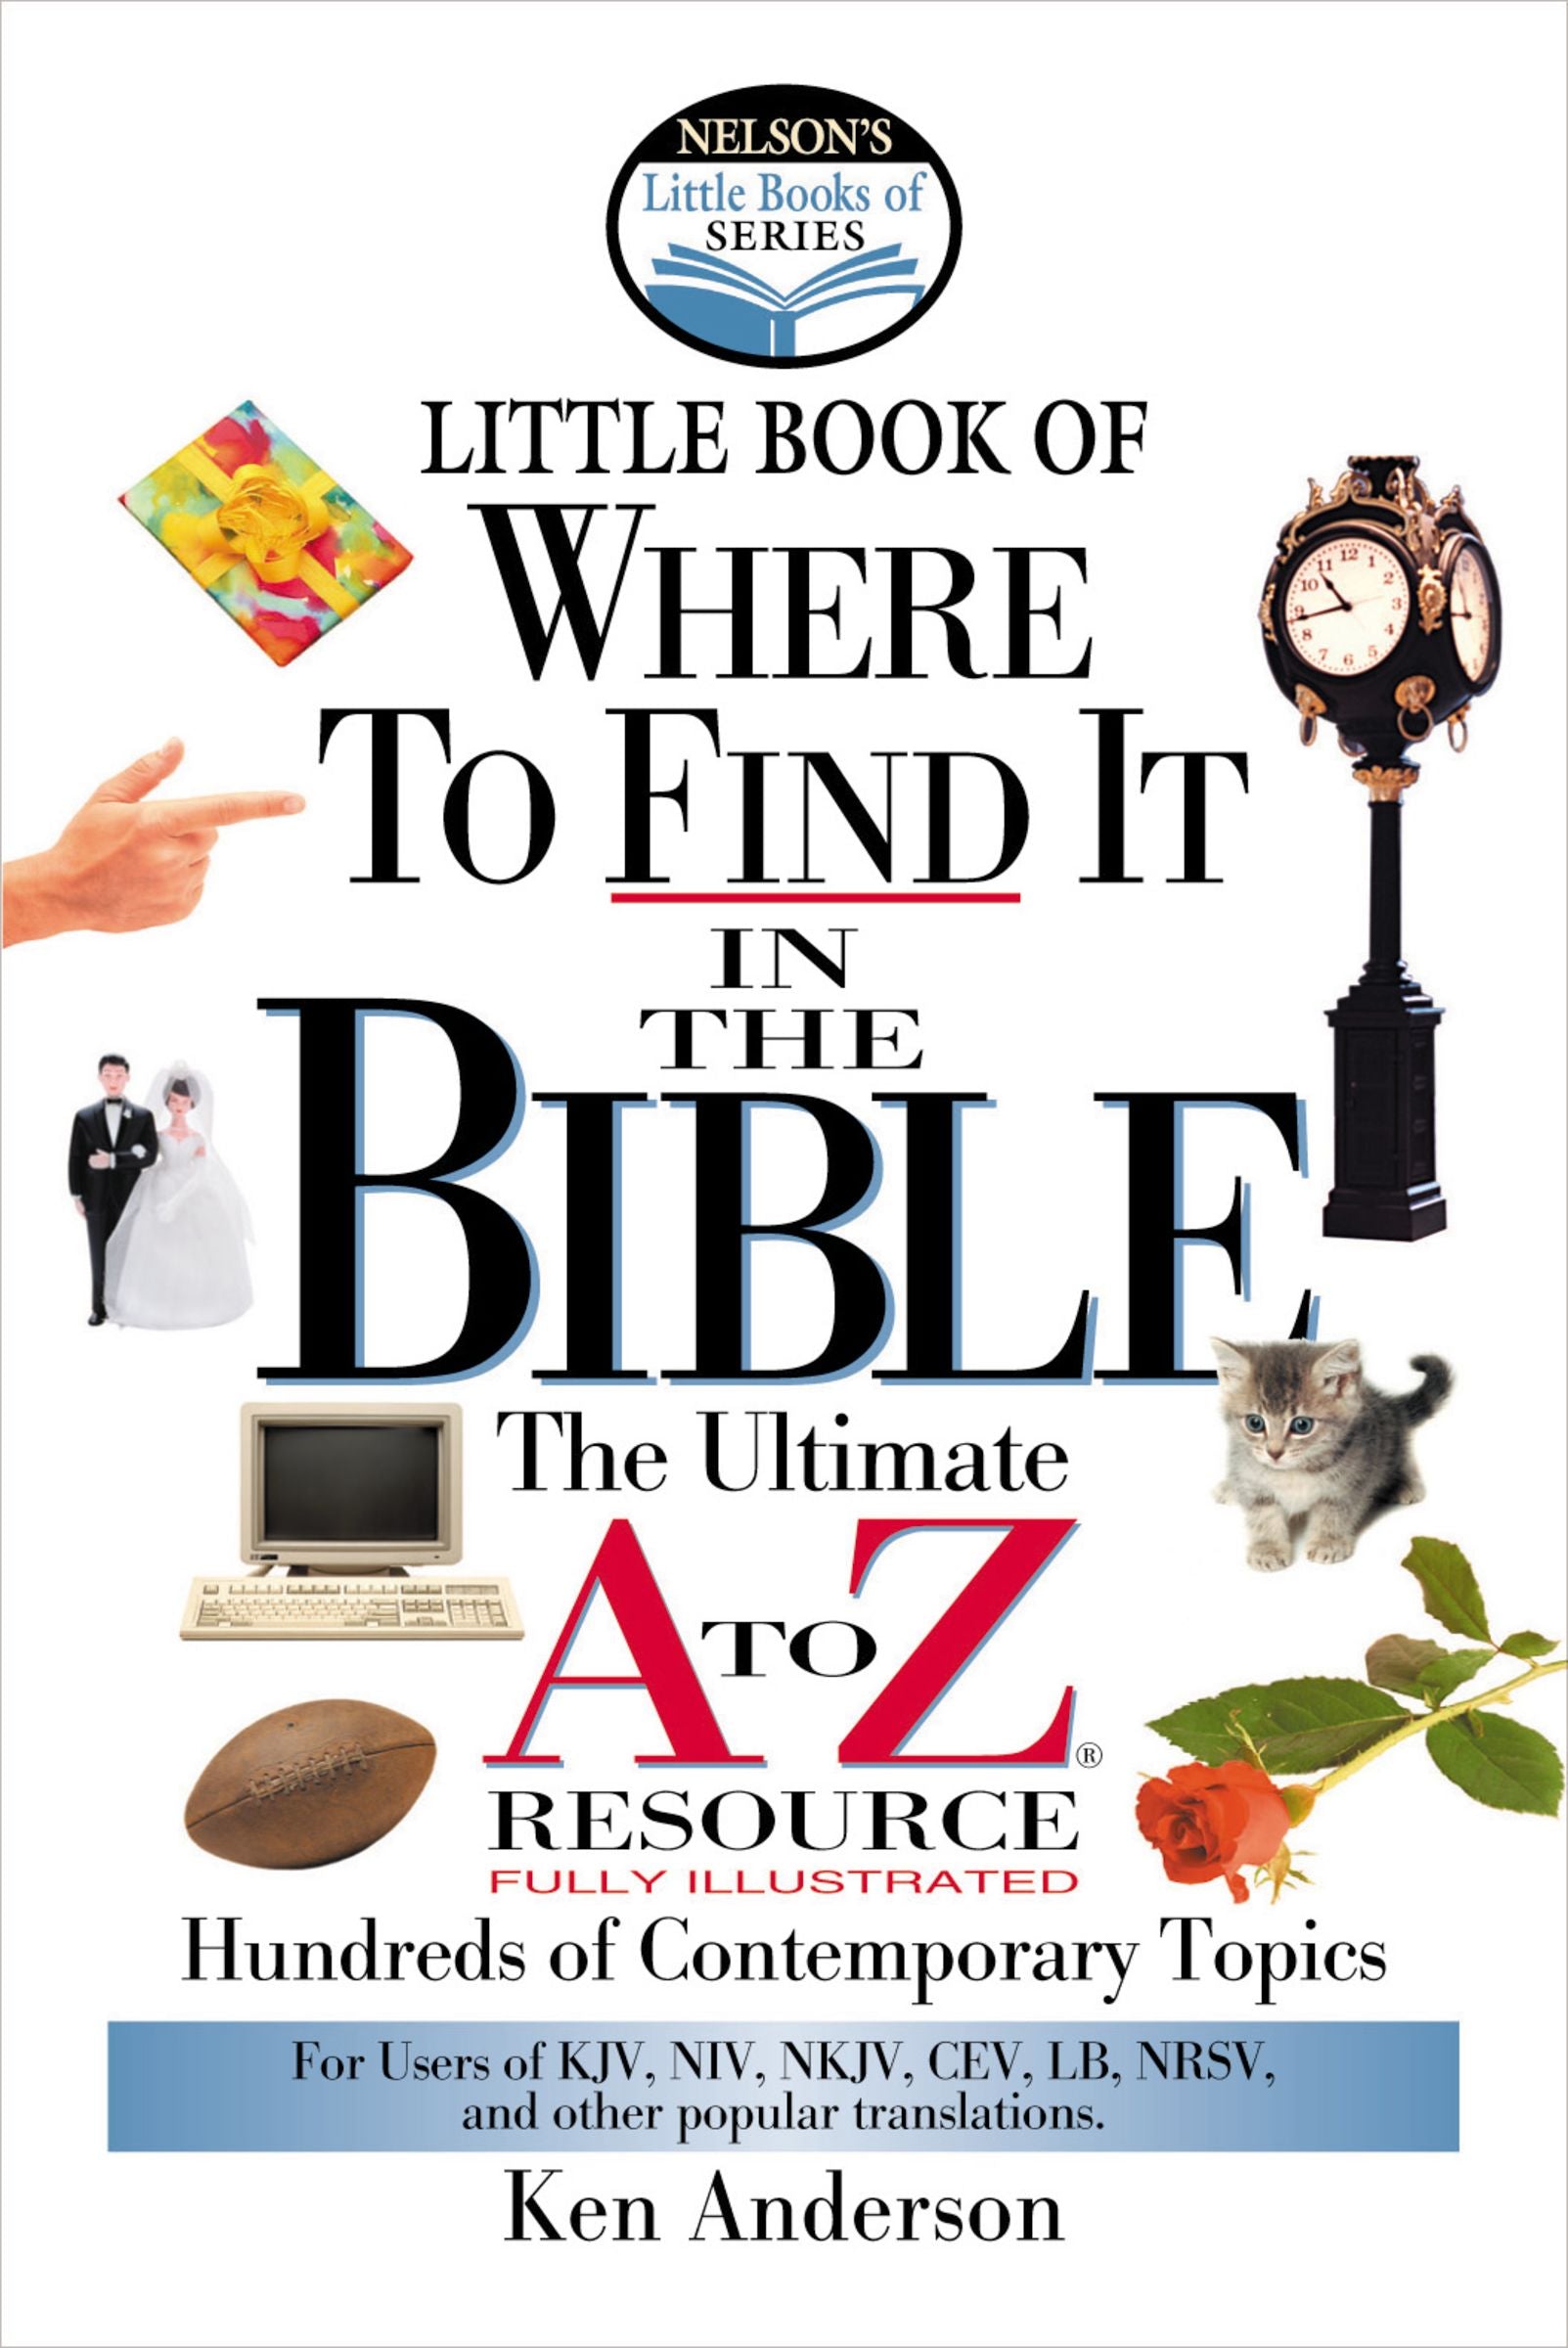 Image of Little Book of Where to Find It in the Bible: The Ultimate A to Z Resource other